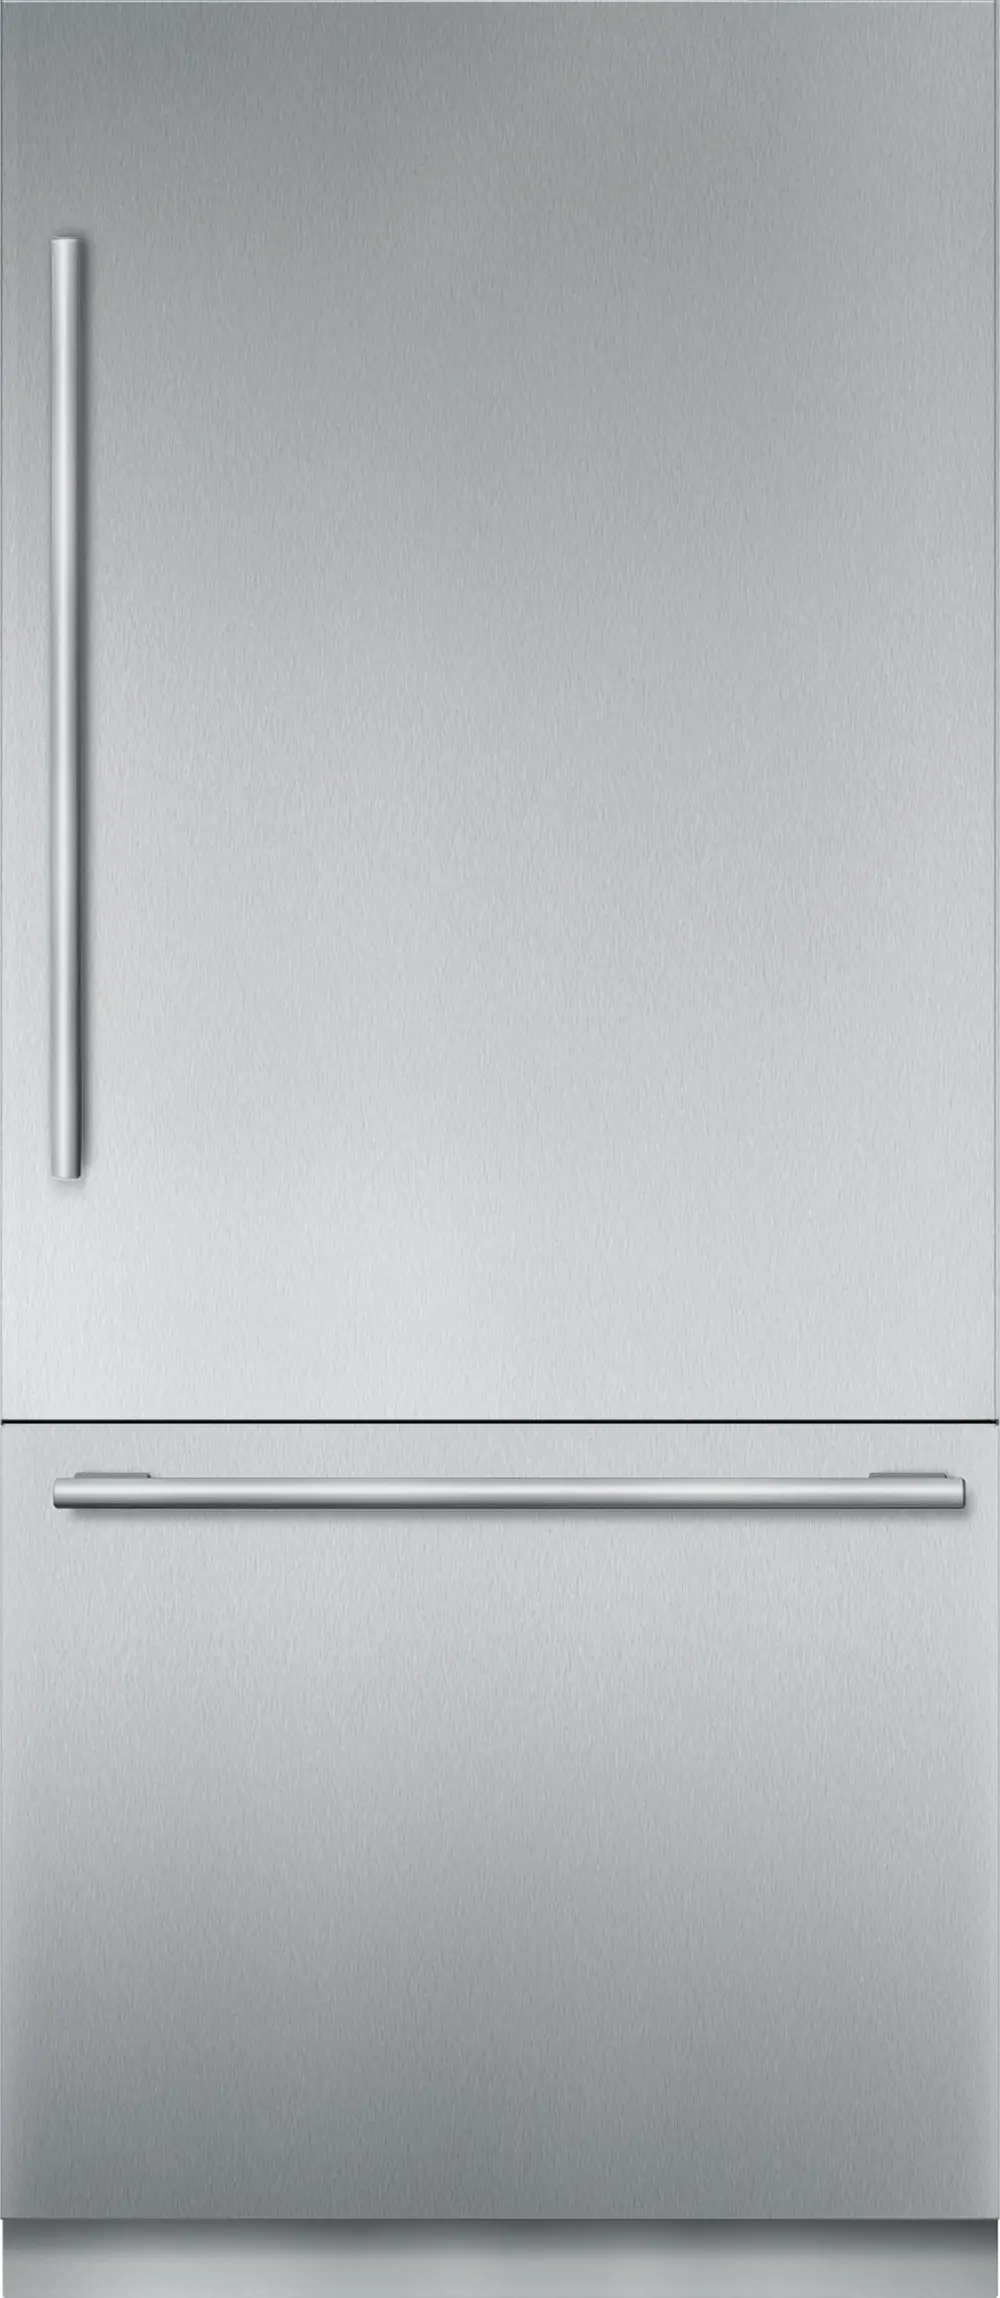 T36BB915SS Thermador Masterpiece 36 Inch Bottom Freezer Refrigerator - Stainless Steel, 19.6 cu. ft.-1